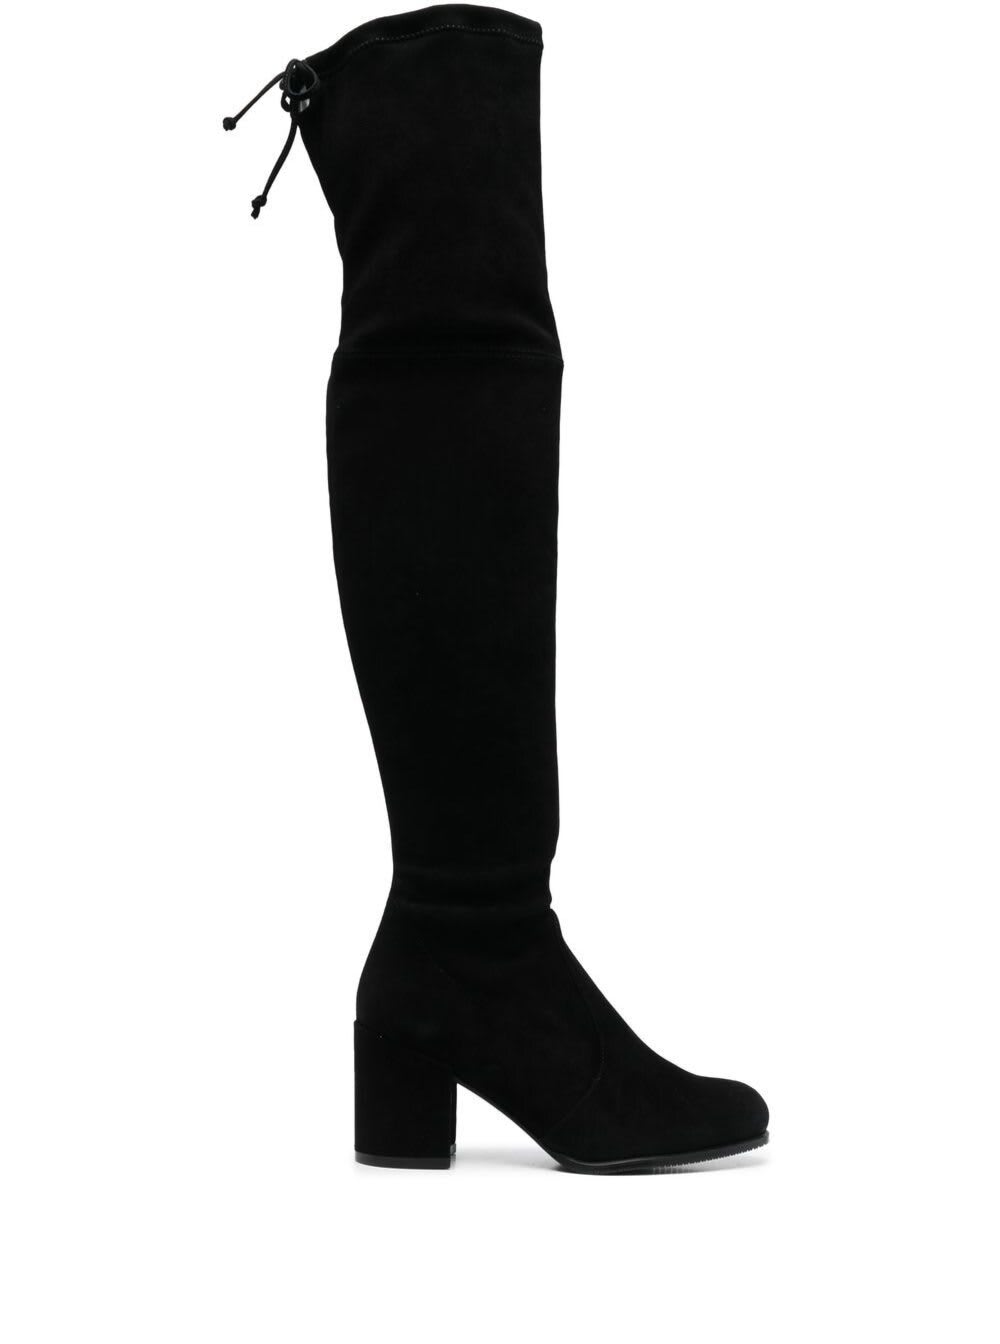 Stuart Weitzman ultrastuart Suede Thigh High Boots in Black Womens Shoes Boots Over-the-knee boots 